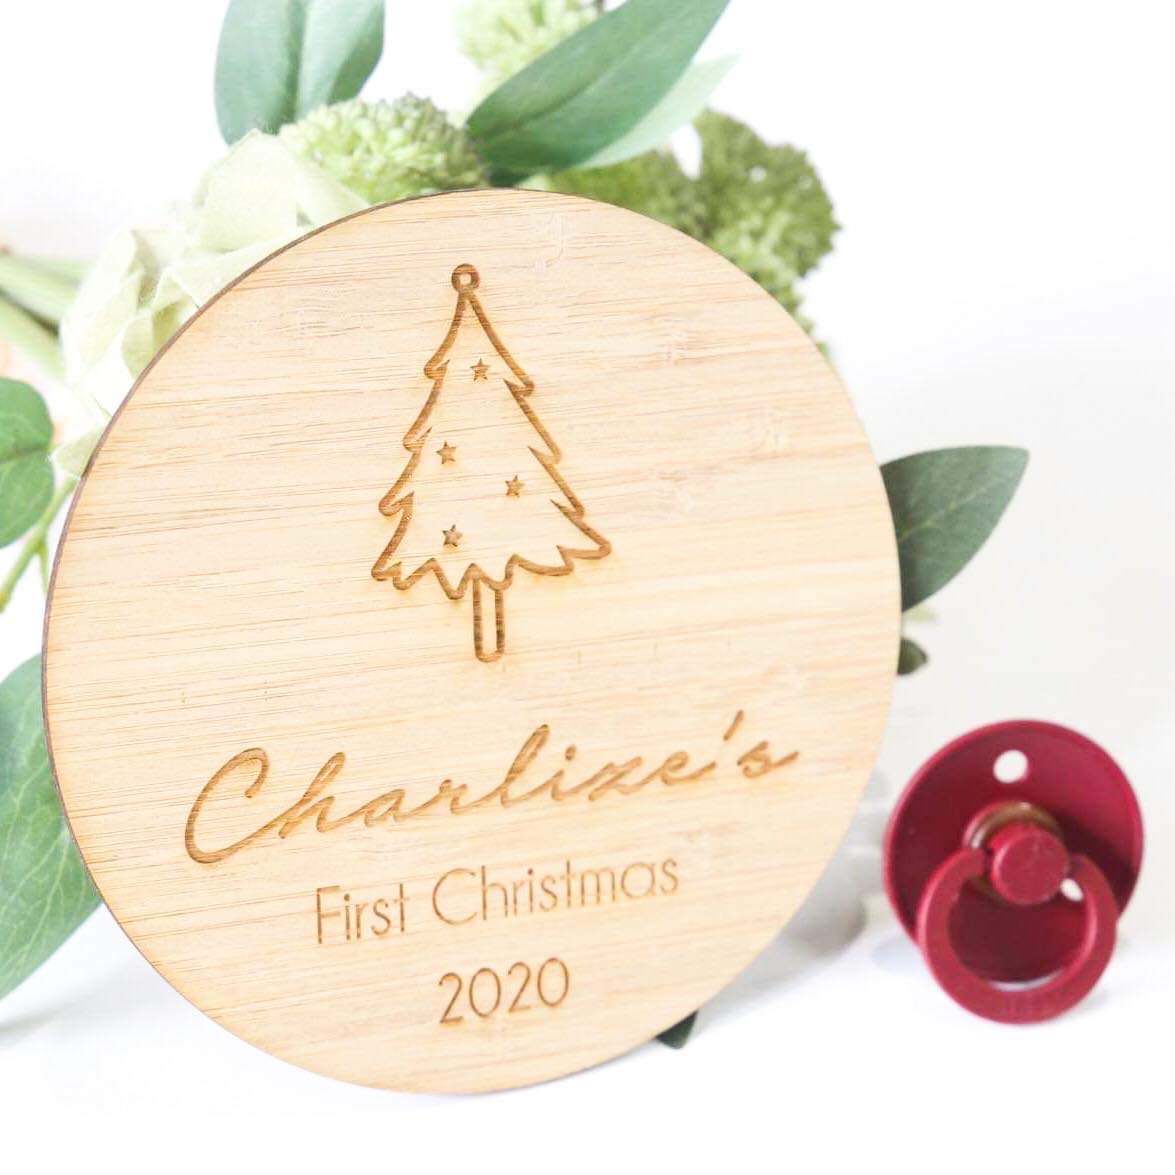 First Christmas Milestone - Engraved